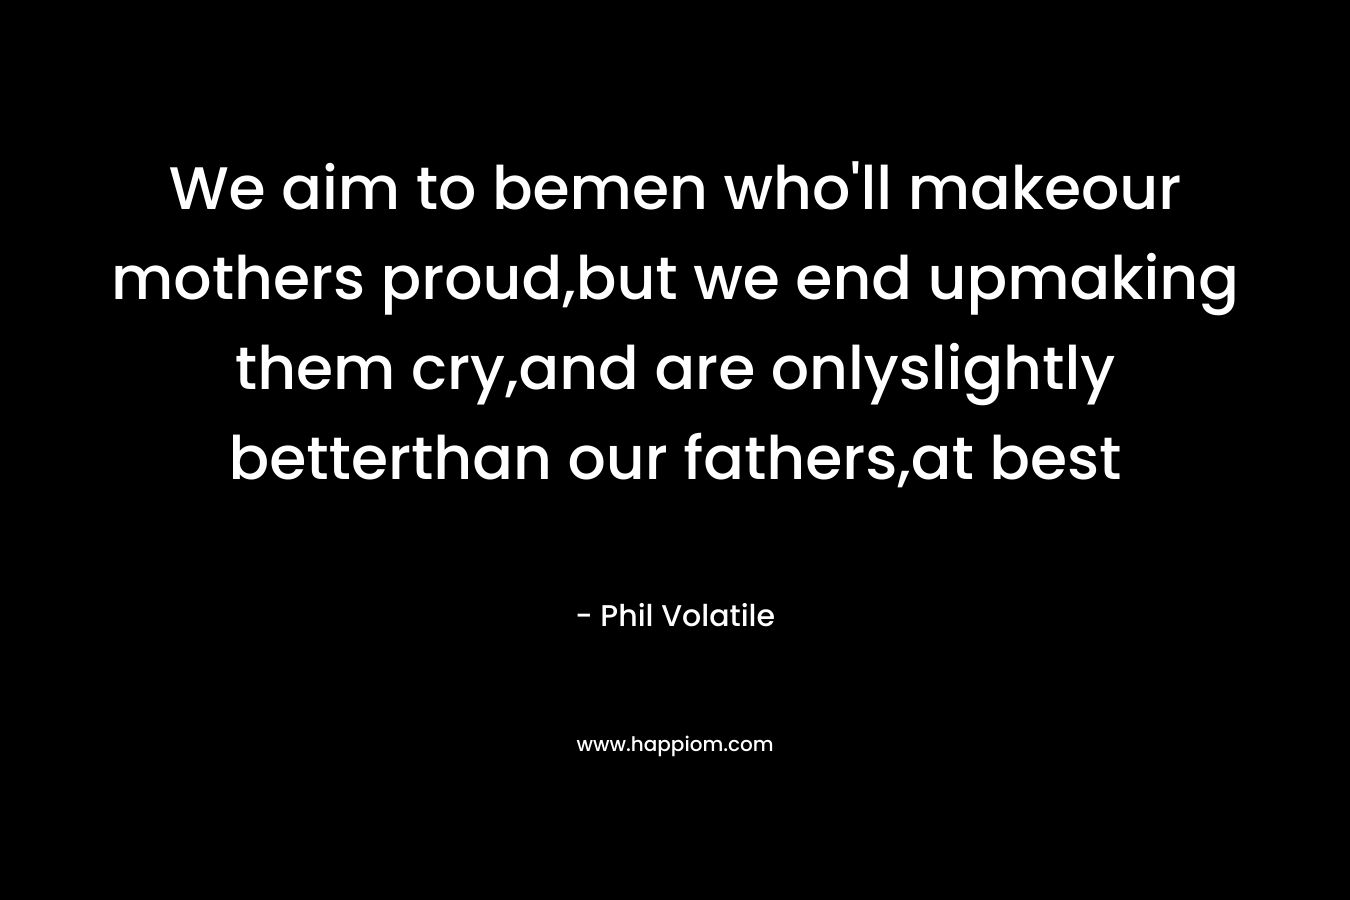 We aim to bemen who’ll makeour mothers proud,but we end upmaking them cry,and are onlyslightly betterthan our fathers,at best – Phil Volatile